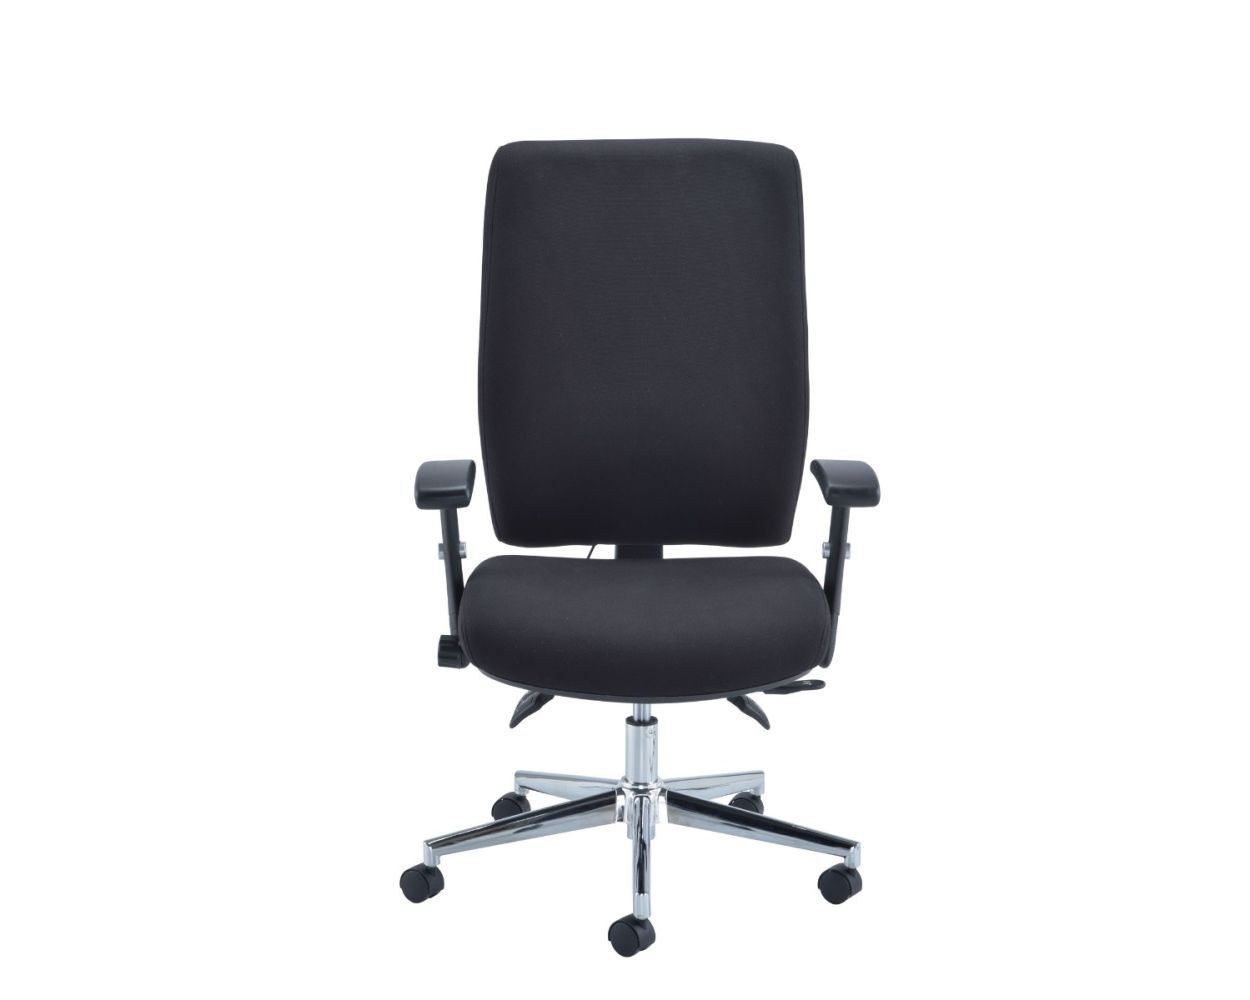 Caracal Fabric 8hr Task Chair With Adjustable Arms Tc Office Seated Furniture Online